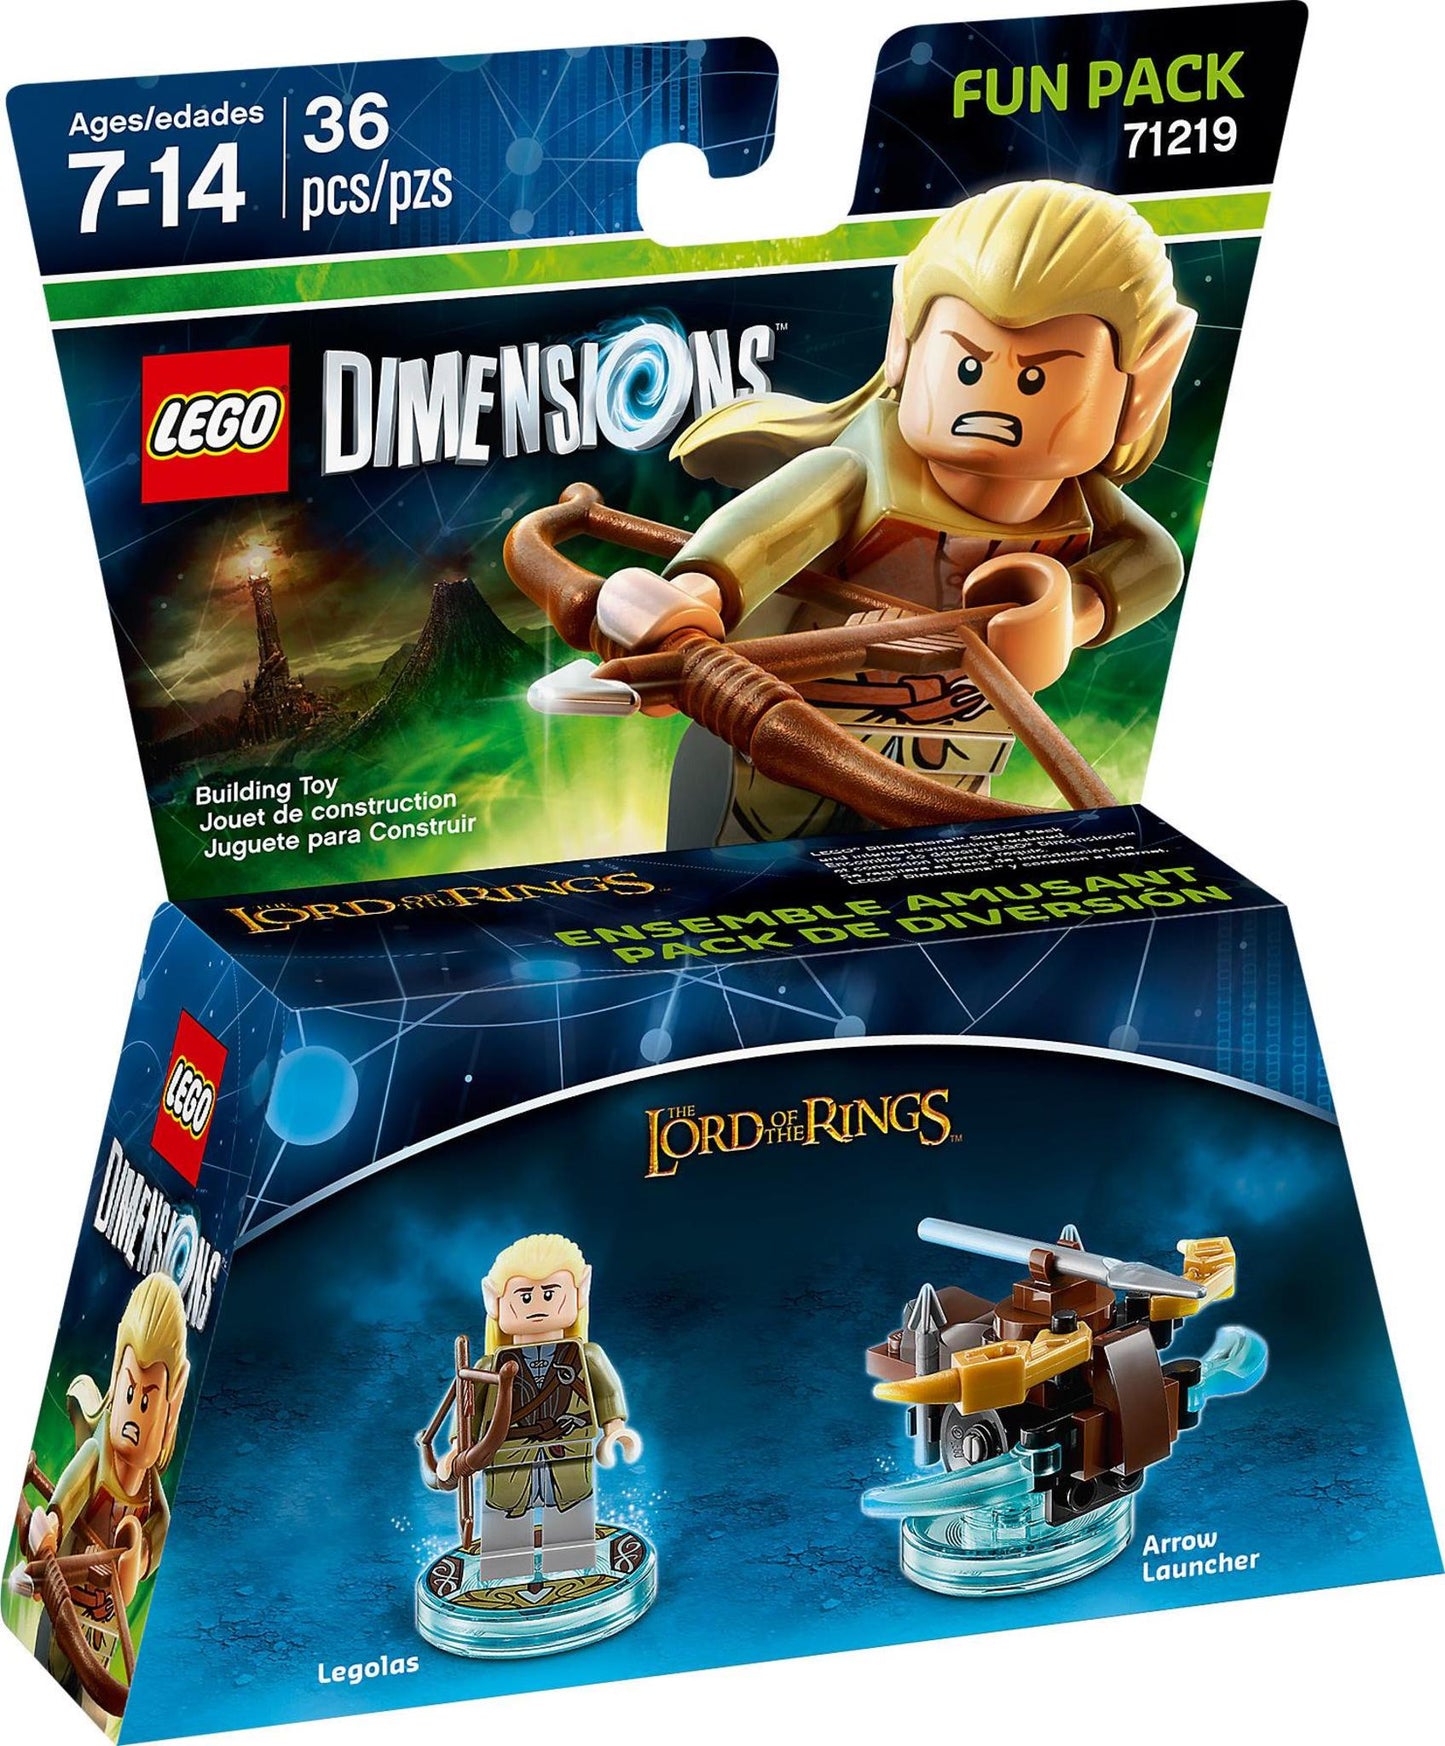 71219 LEGO Dimension - The Lord of the Ring - Fun Pack: Legolas